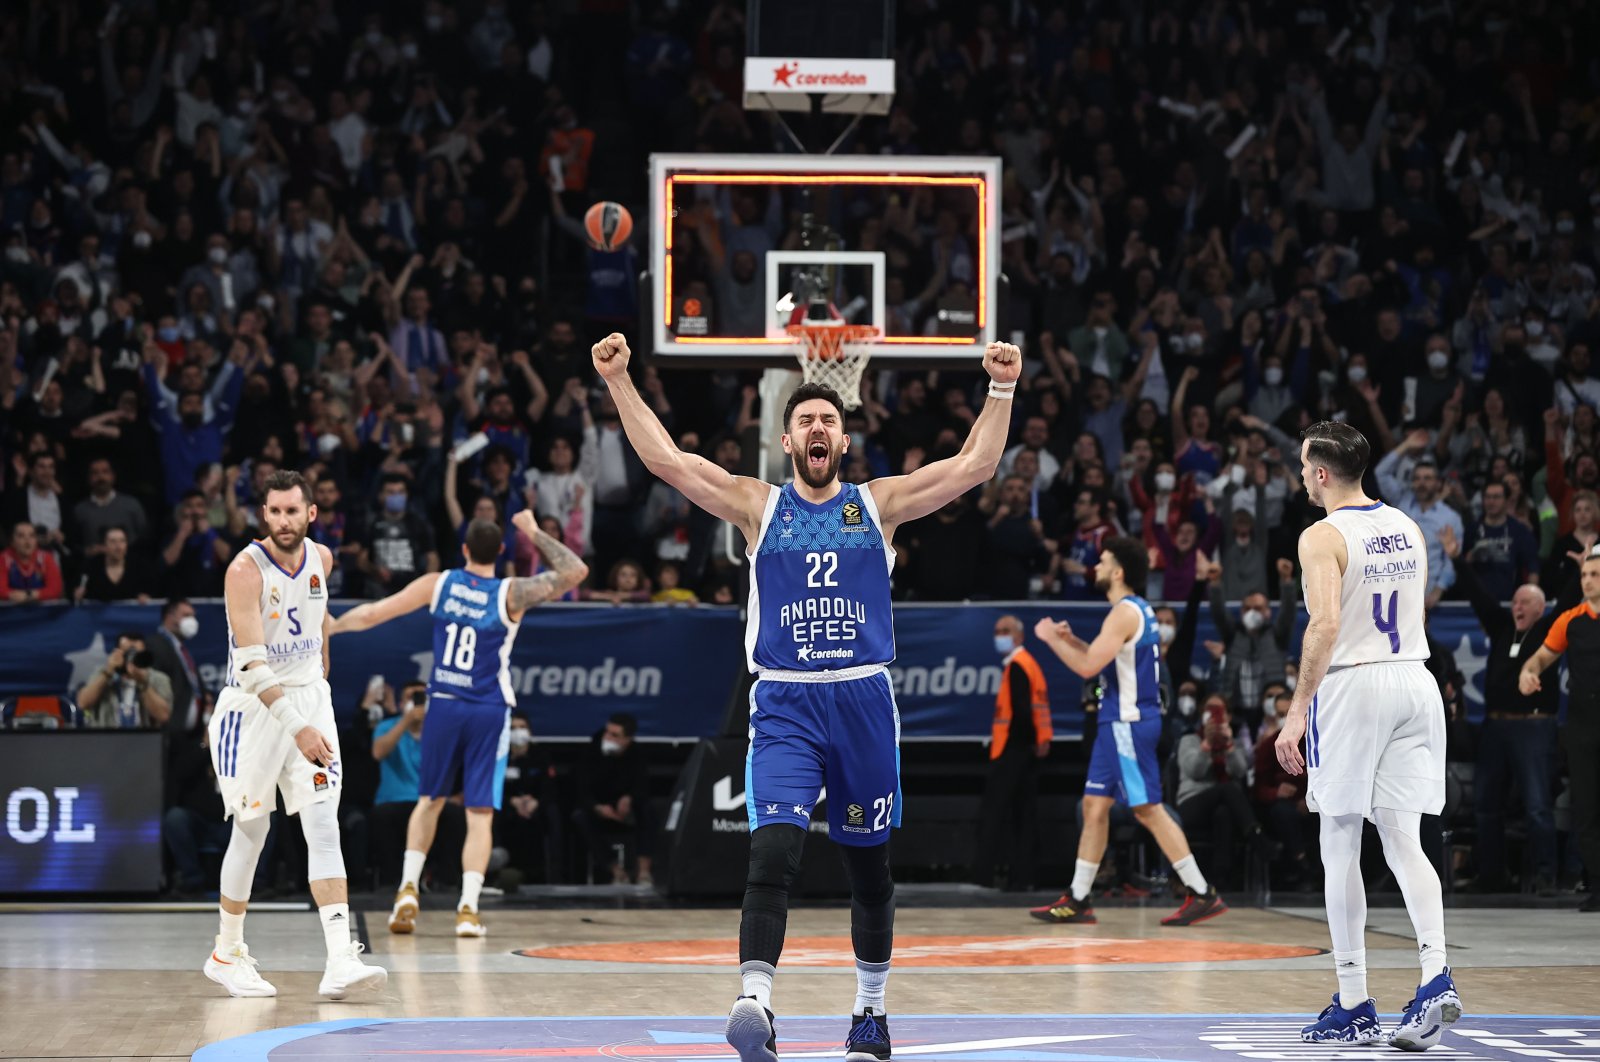 Anadolu Efes players celebrate their victory against Anadolu Efes during the Turkish Airlines EuroLeague match at Sinan Erdem Sports Complex in Istanbul, Turkey, March 22, 2022. (AA Photo)